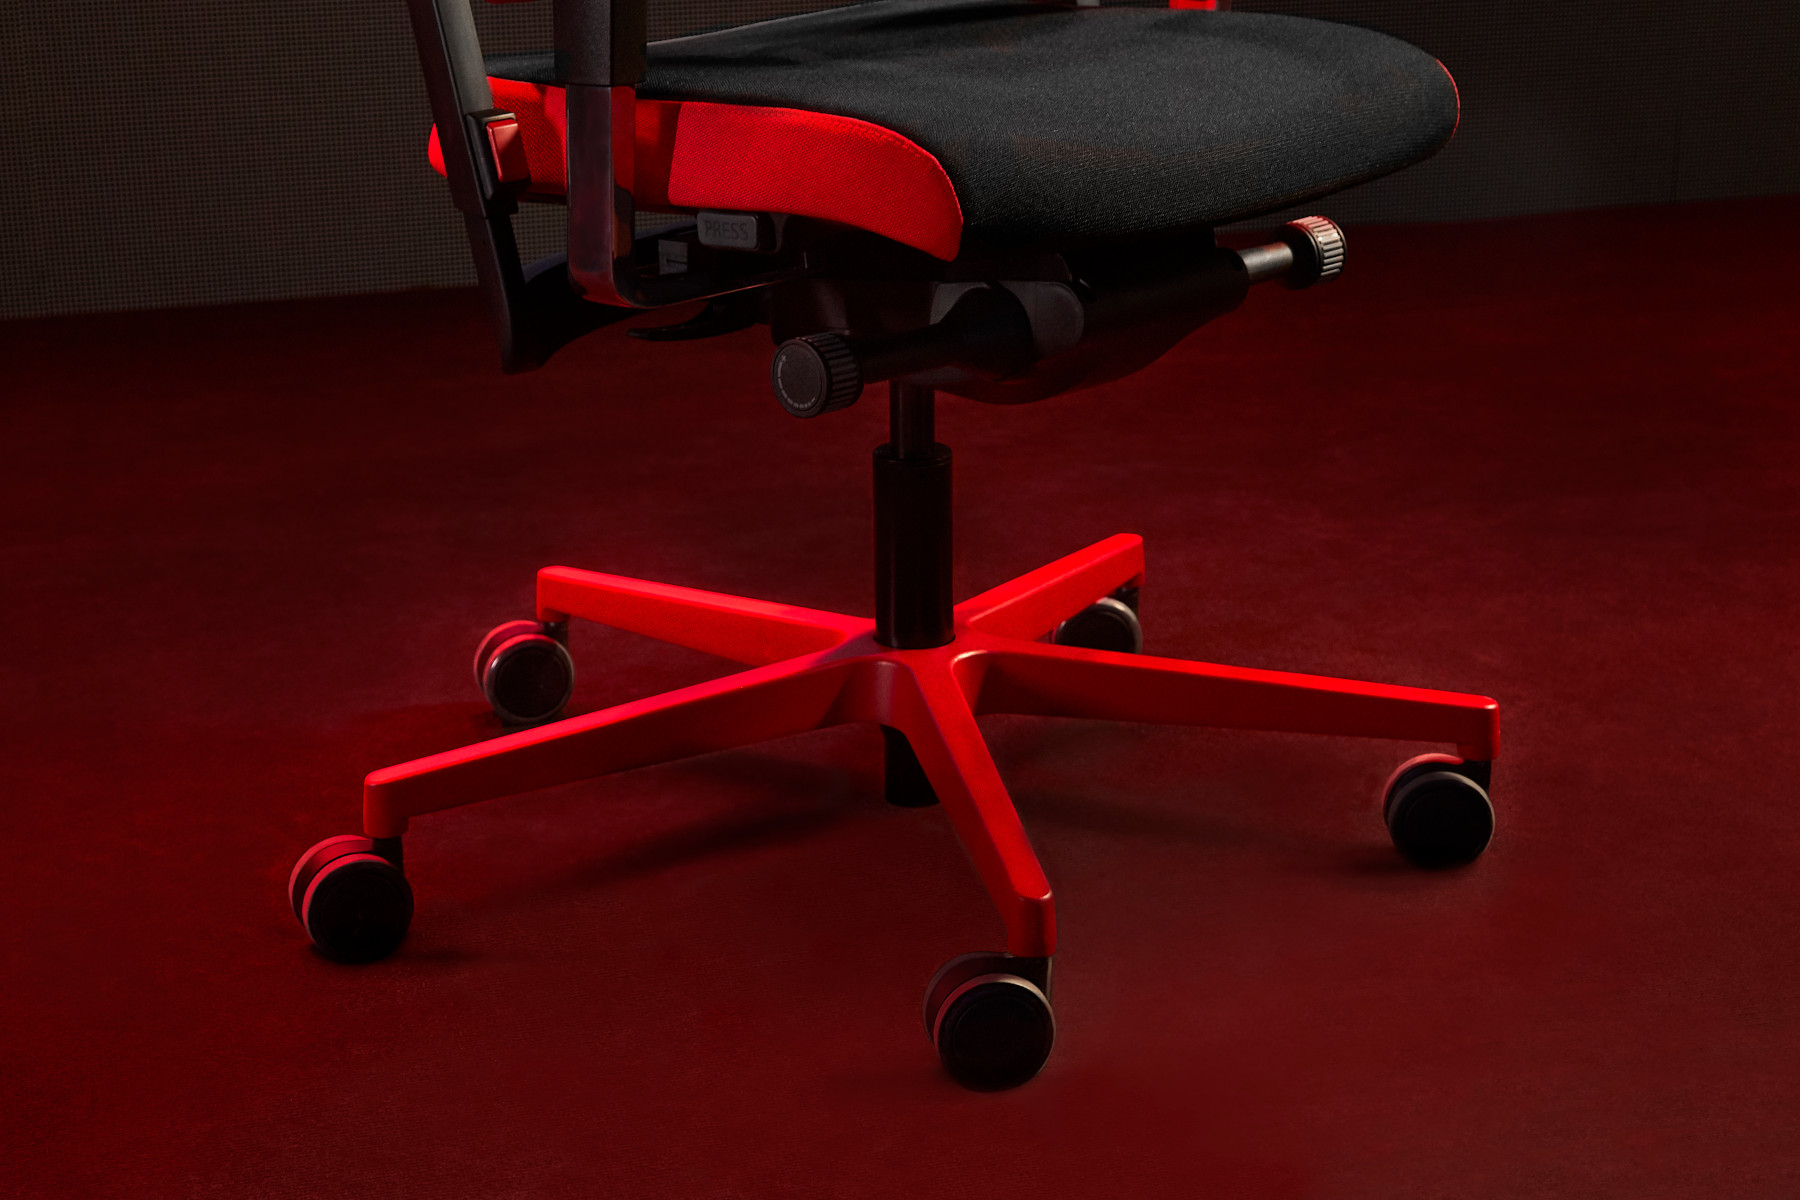 Rohde & Grahl Xilium Gamingstuhl RED EDITION